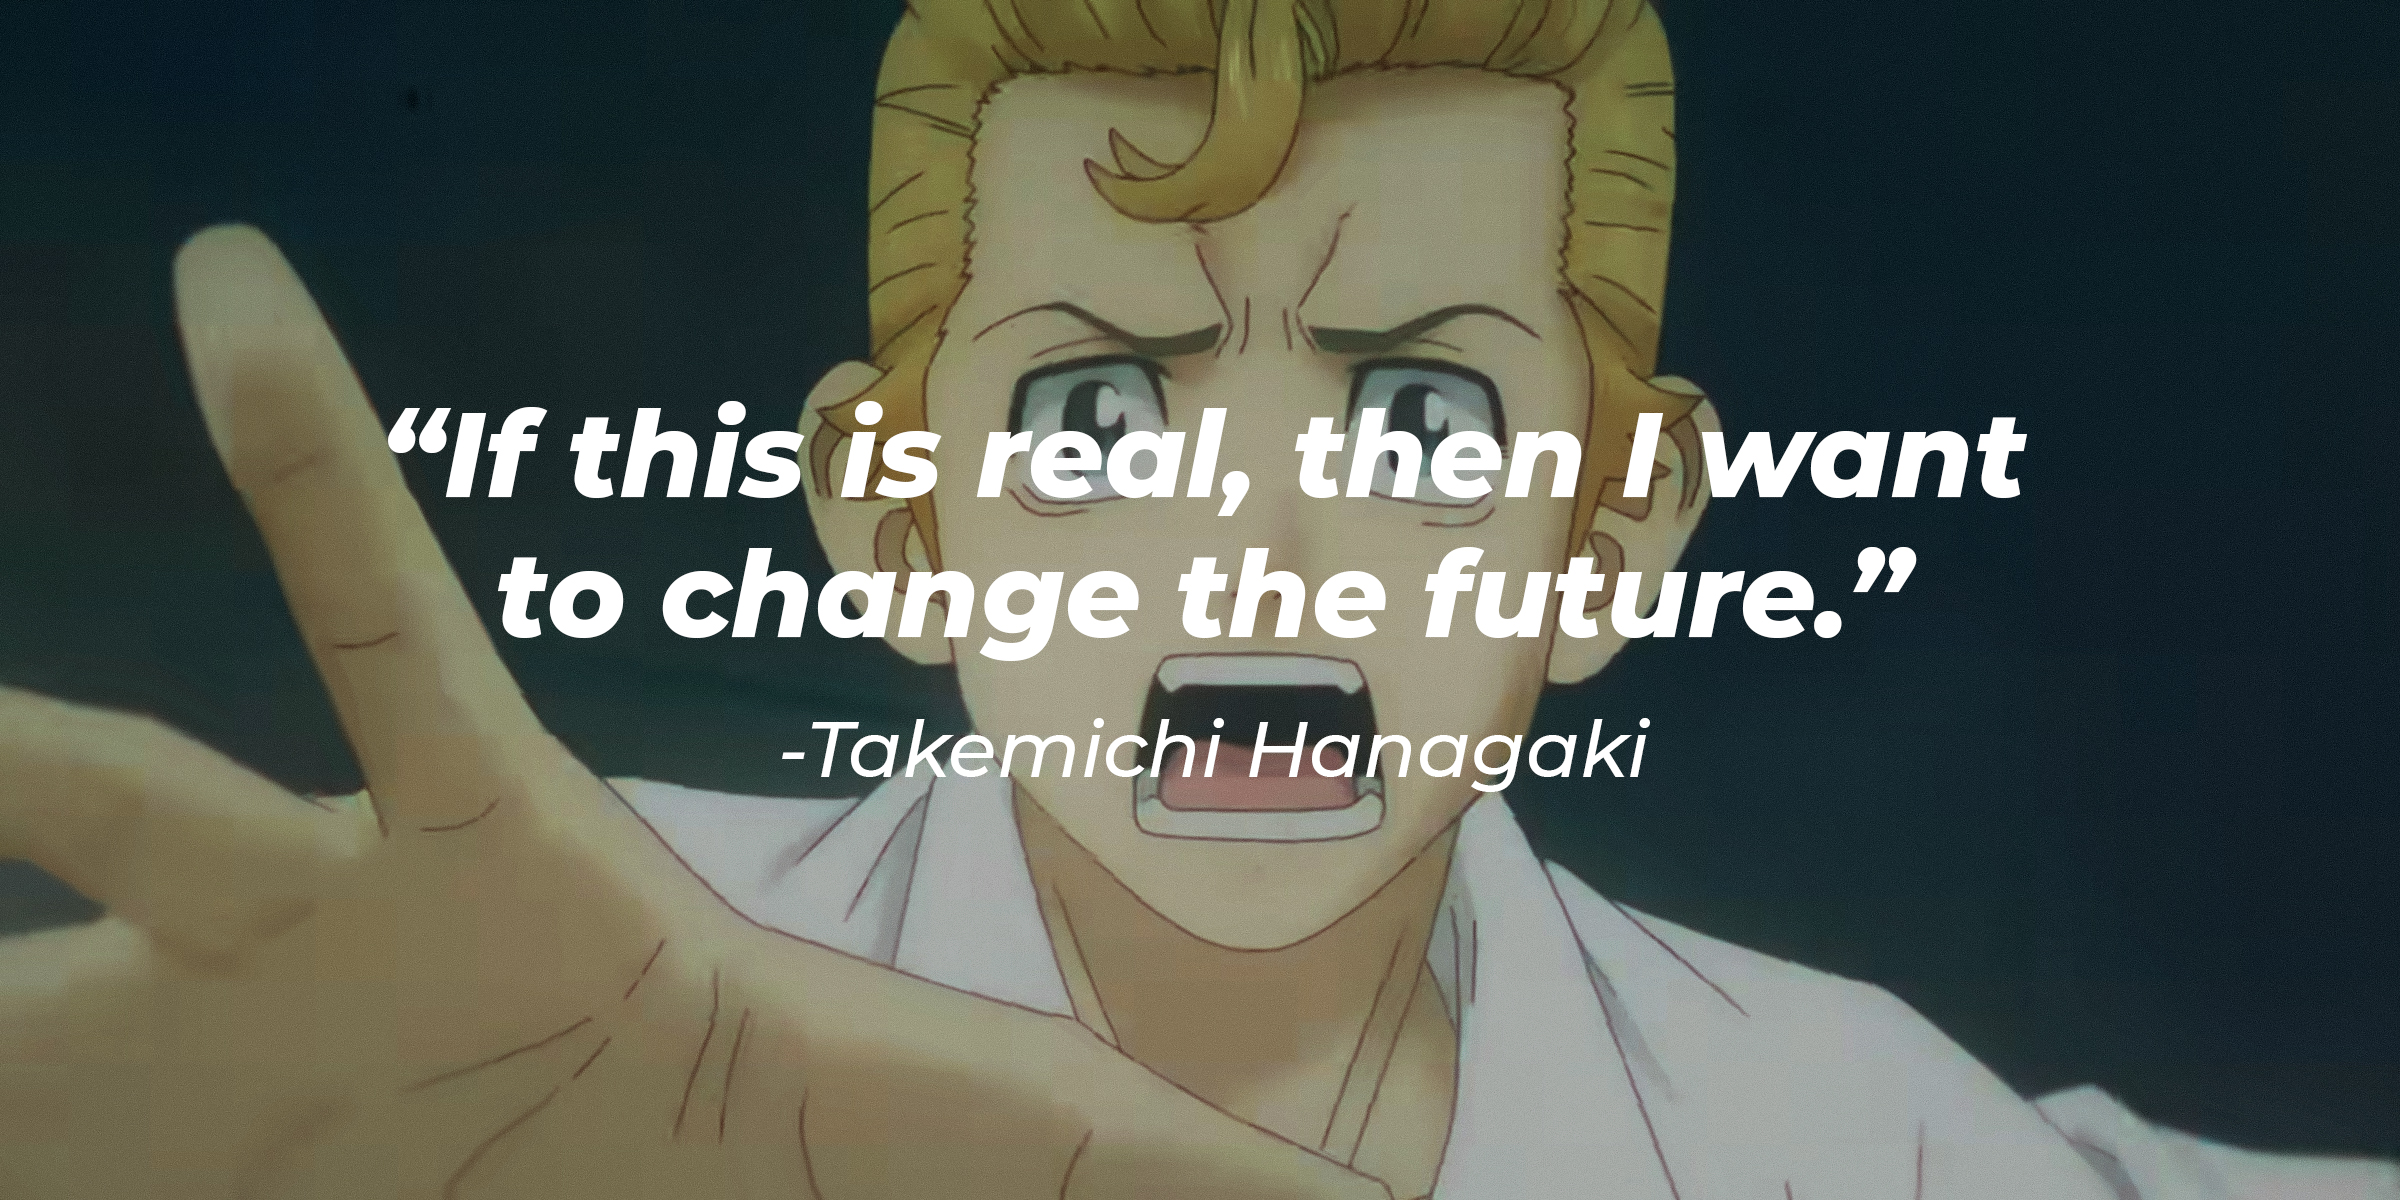 Photo of Takemichi Hanagaki with his quote: "If this is real, then I want to change the future." | Source: Youtube.com/Crunchyroll Collection